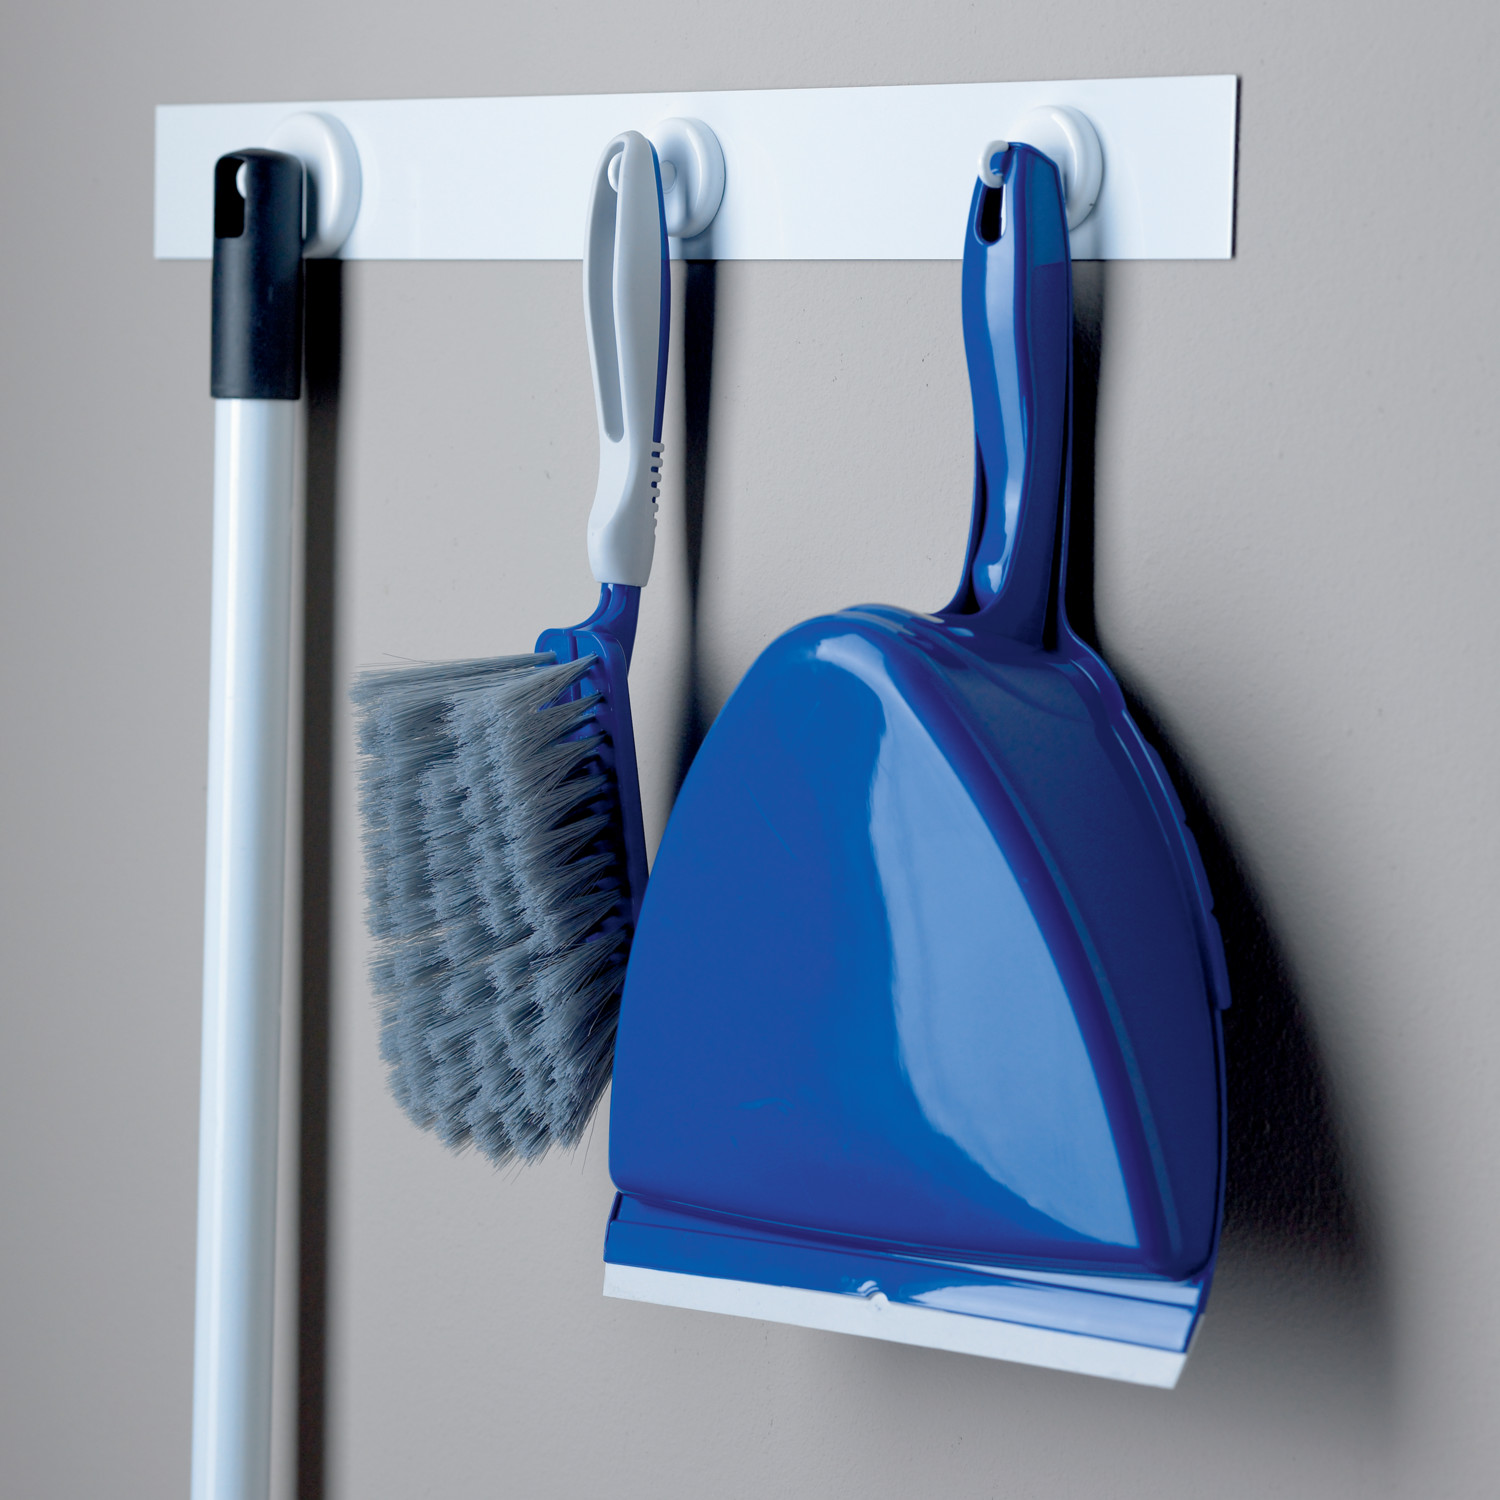 Strong hook magnets can be used for all manner of purposes and positioned anywhere